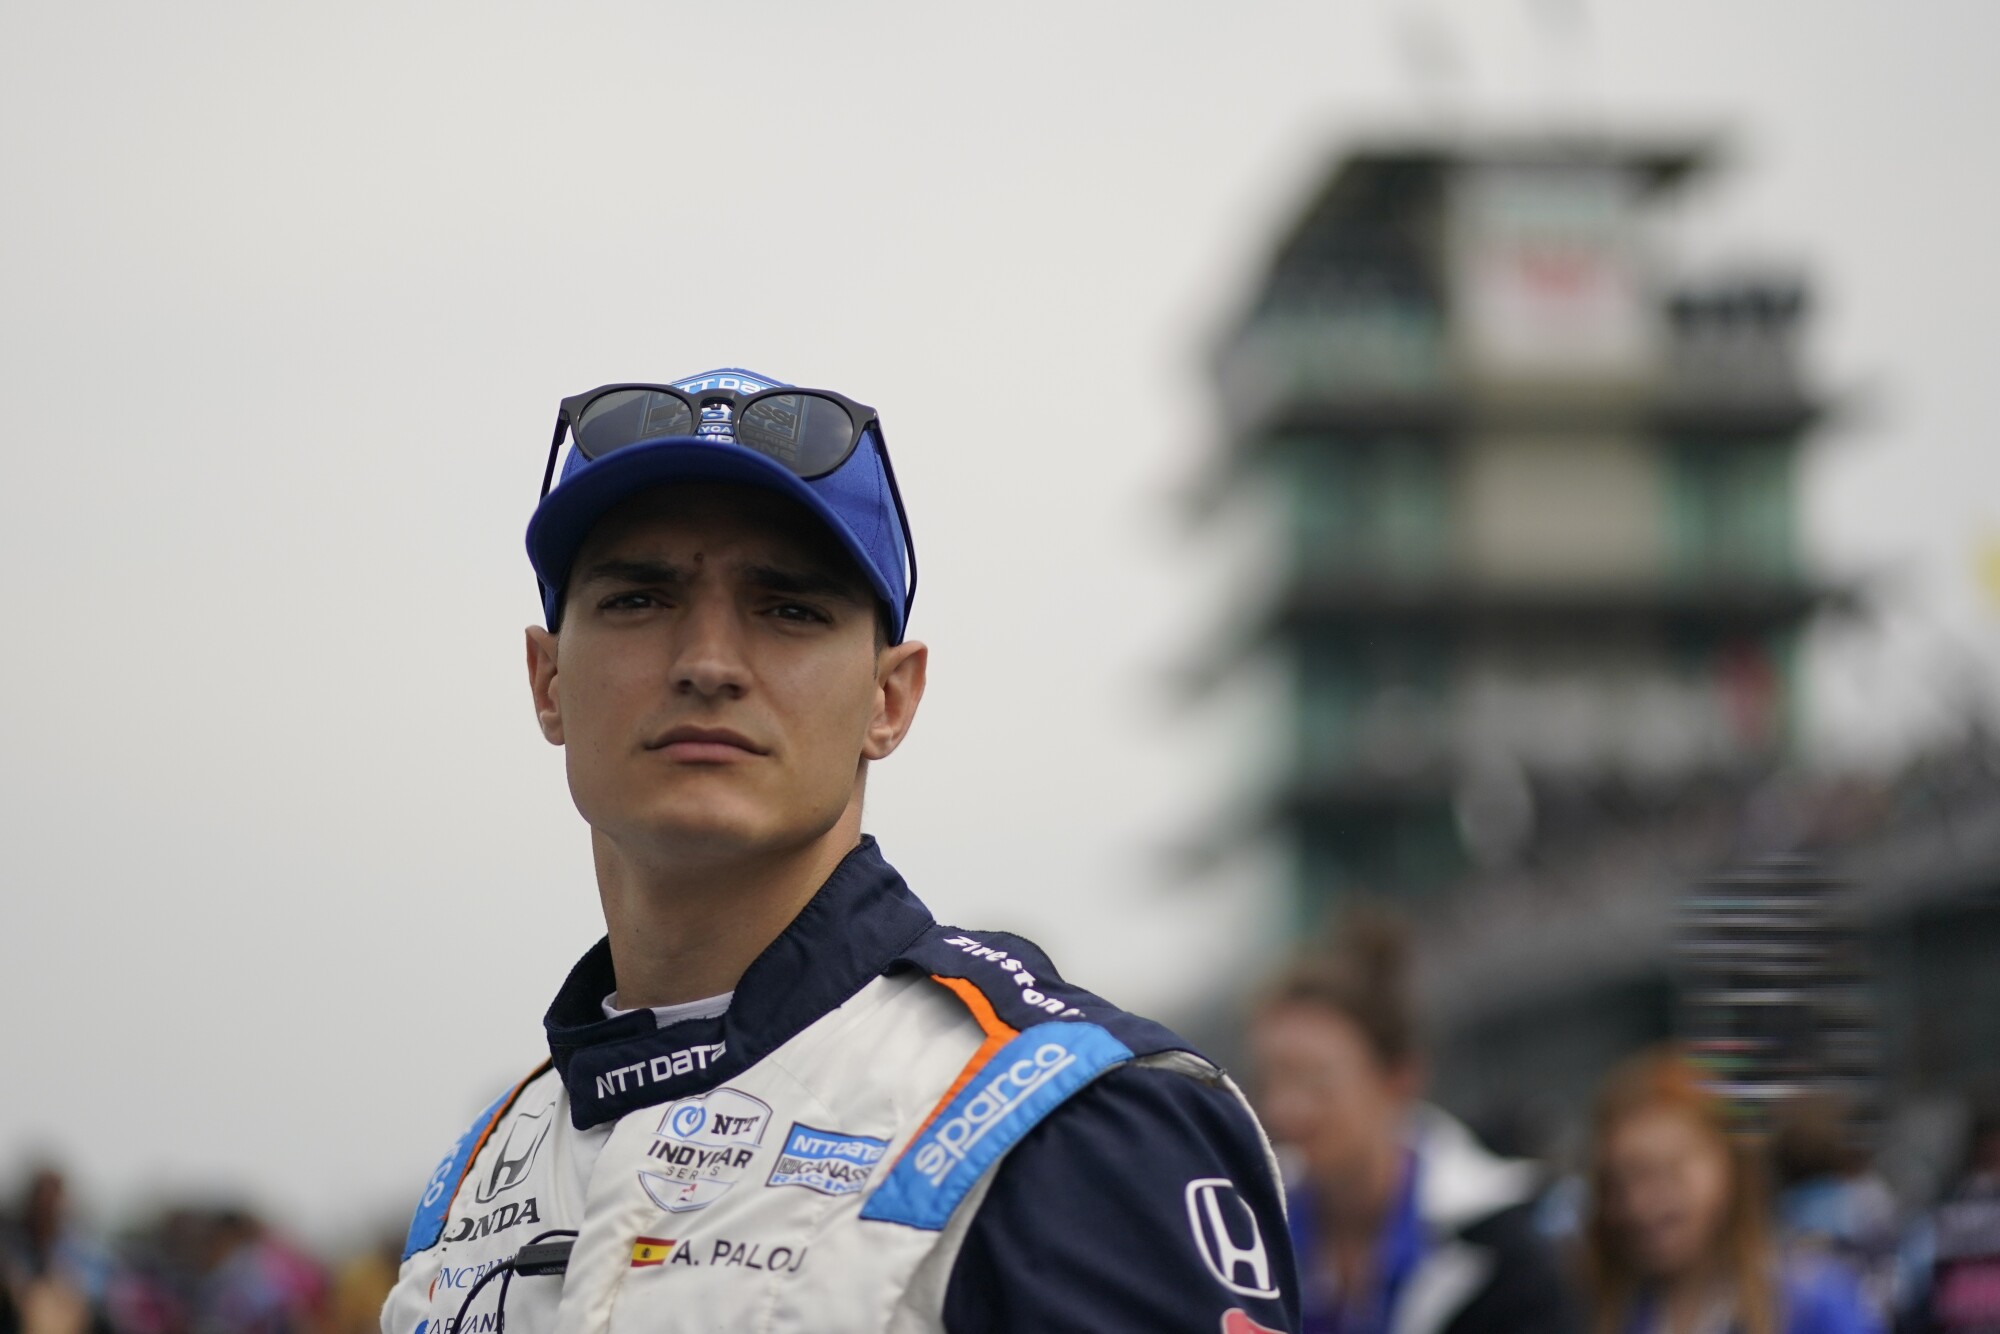 Defending IndyCar League champion Alex Palou is looking forward to the track during practice.